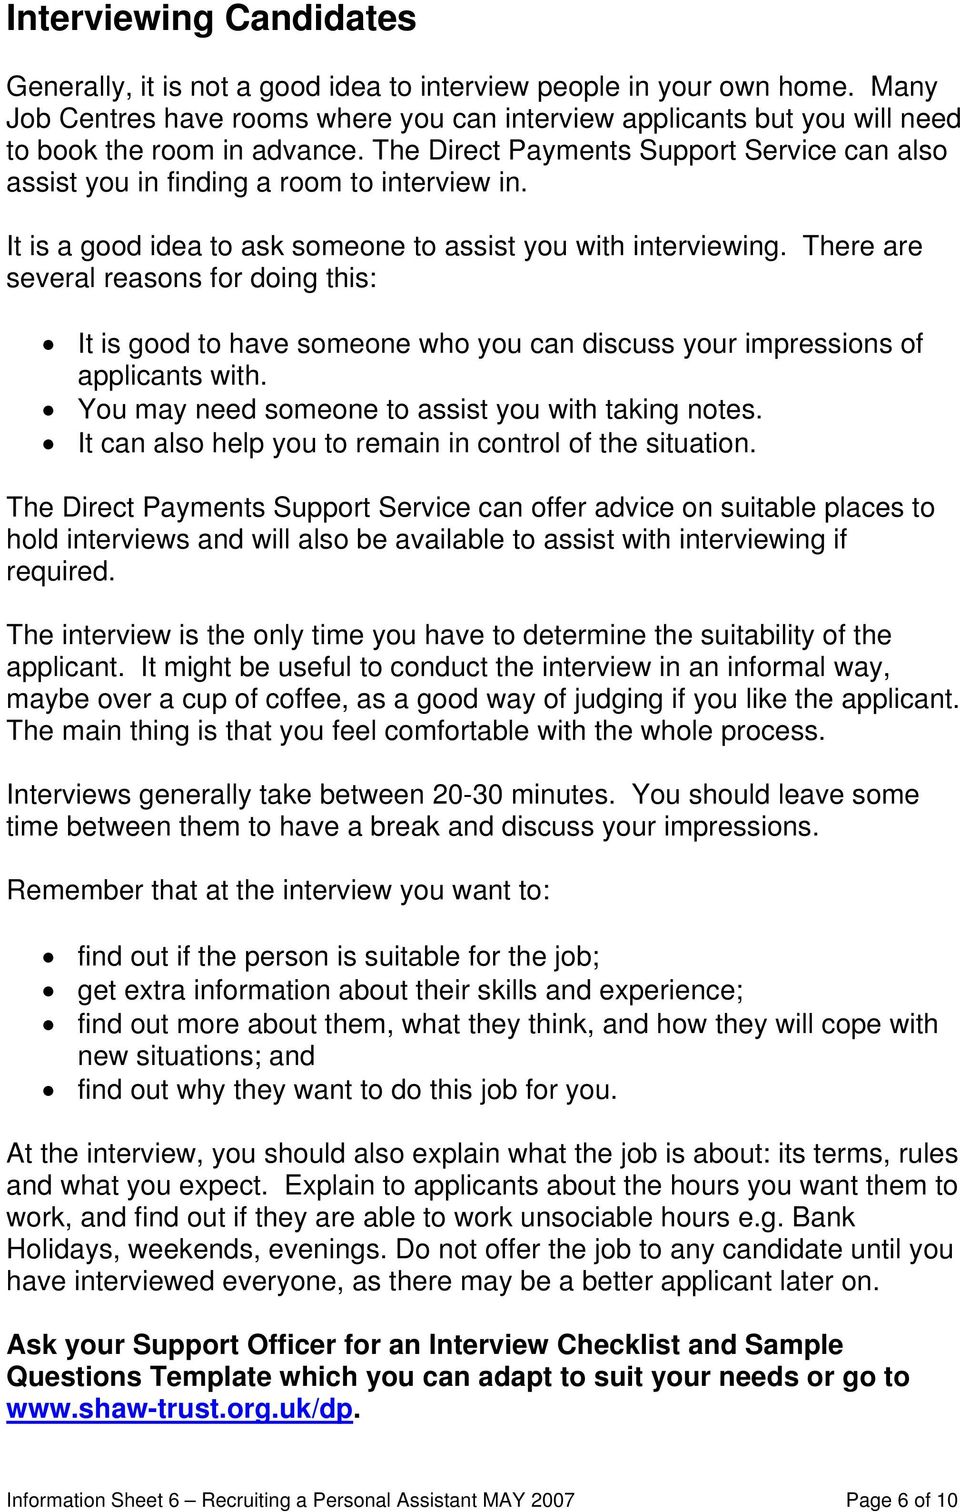 It is a good idea to ask someone to assist you with interviewing. There are several reasons for doing this: It is good to have someone who you can discuss your impressions of applicants with.